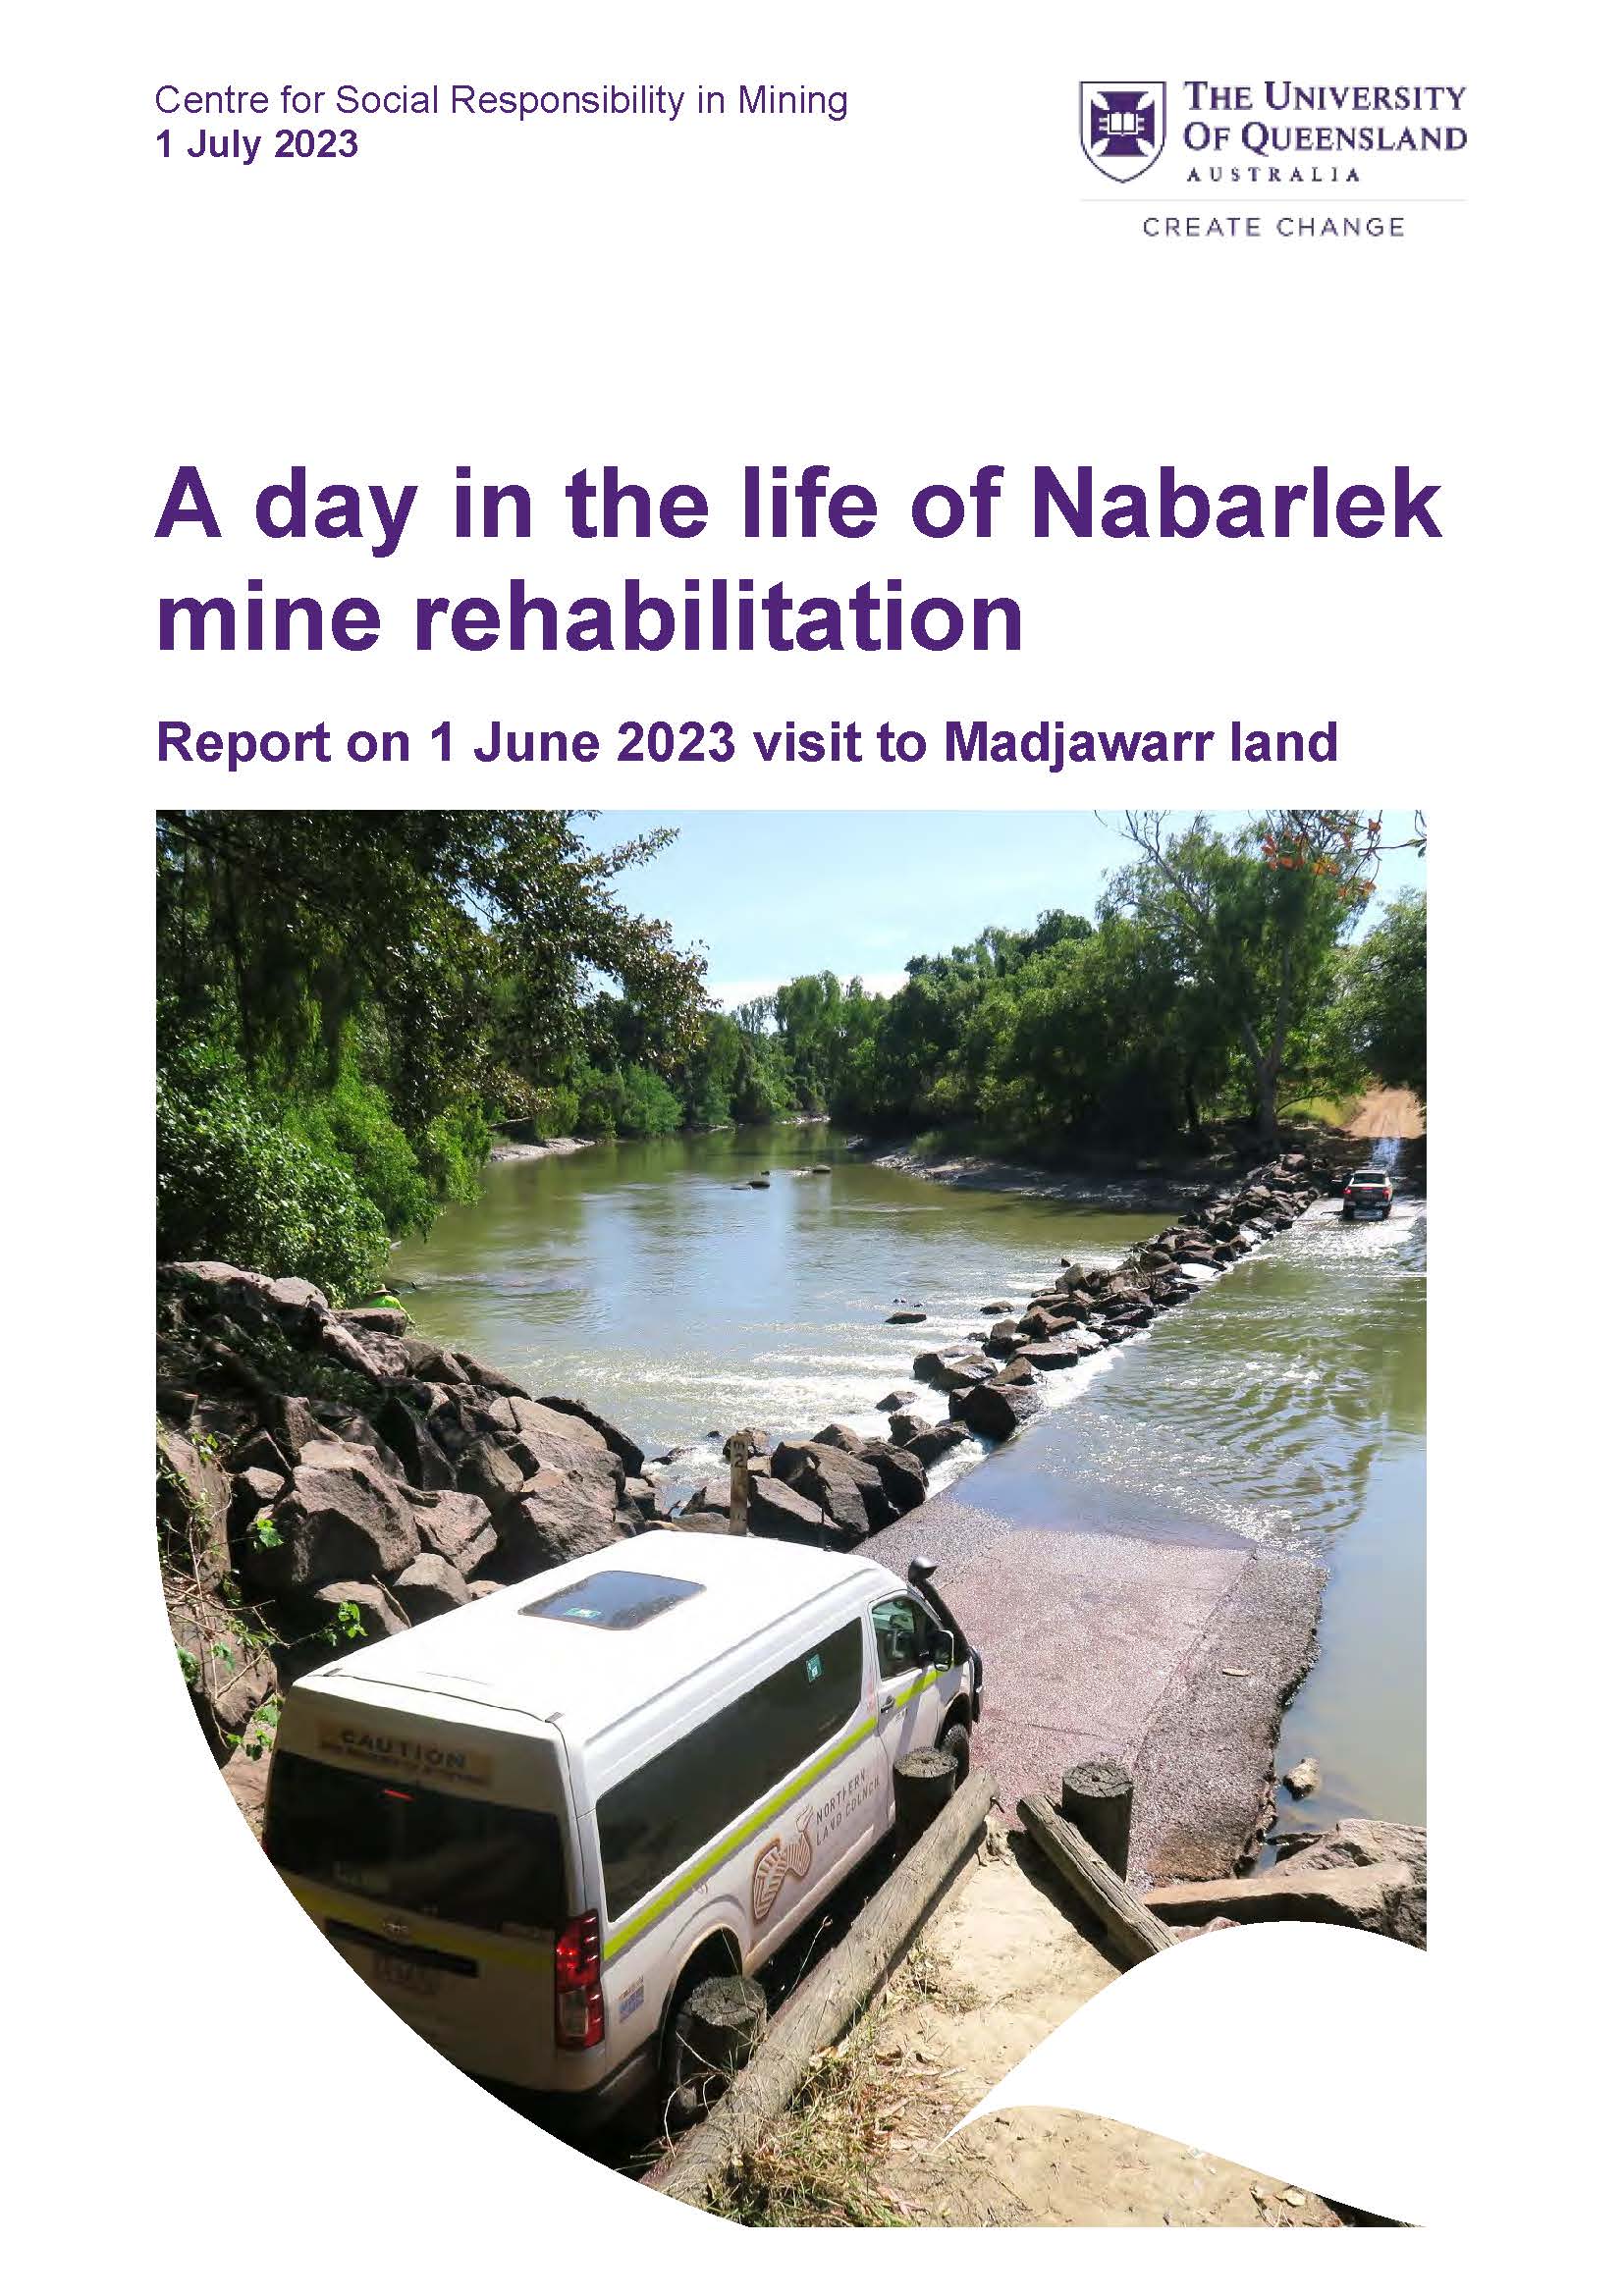 A Day in the life of Nabarlek mine rehabilitation: Report on 1 June 2023 visit to Madjawarr land